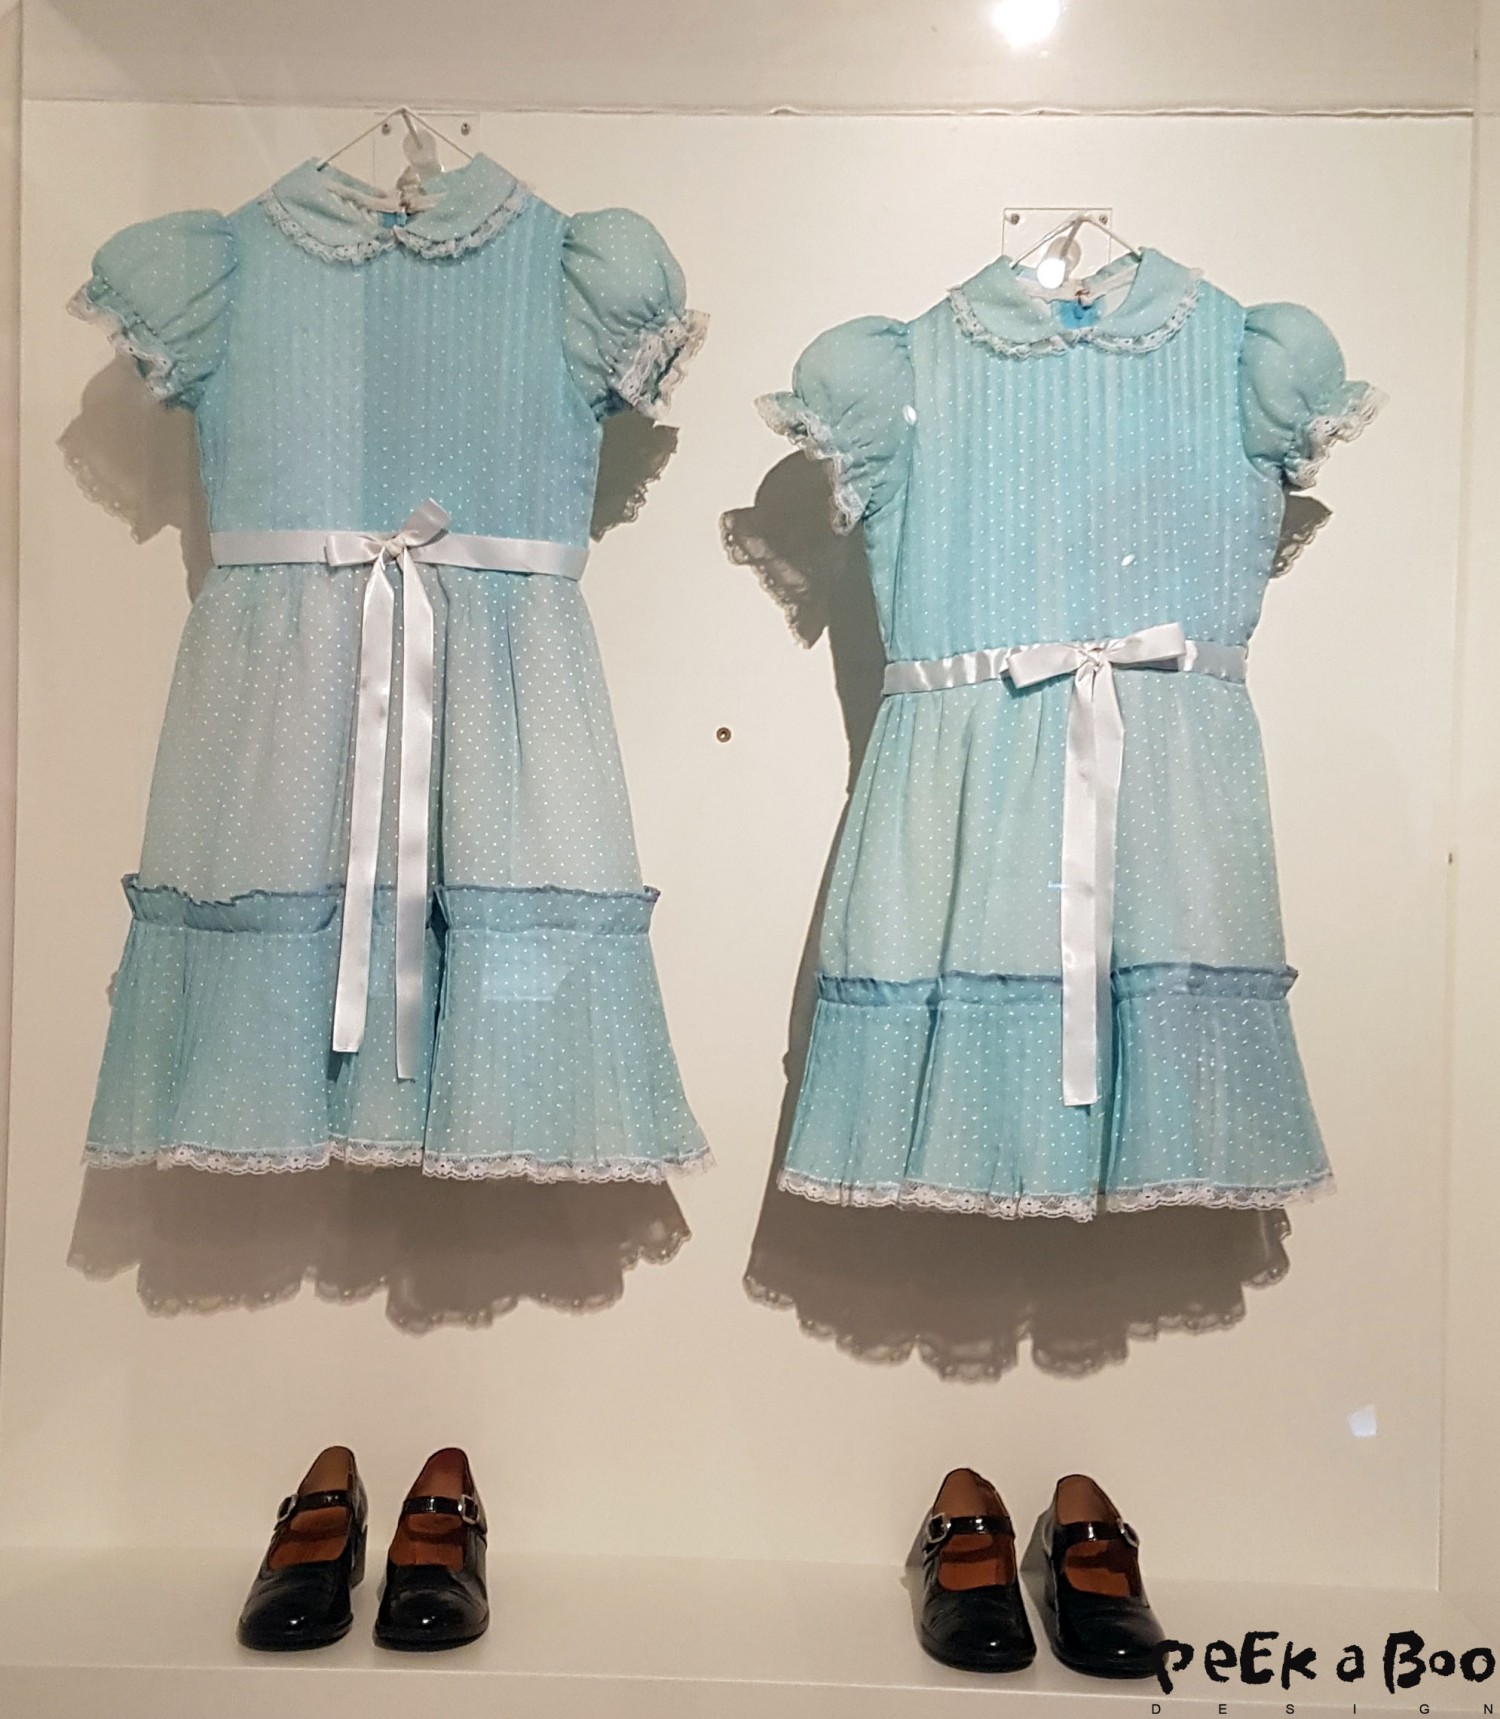 The dresses from The Shining.